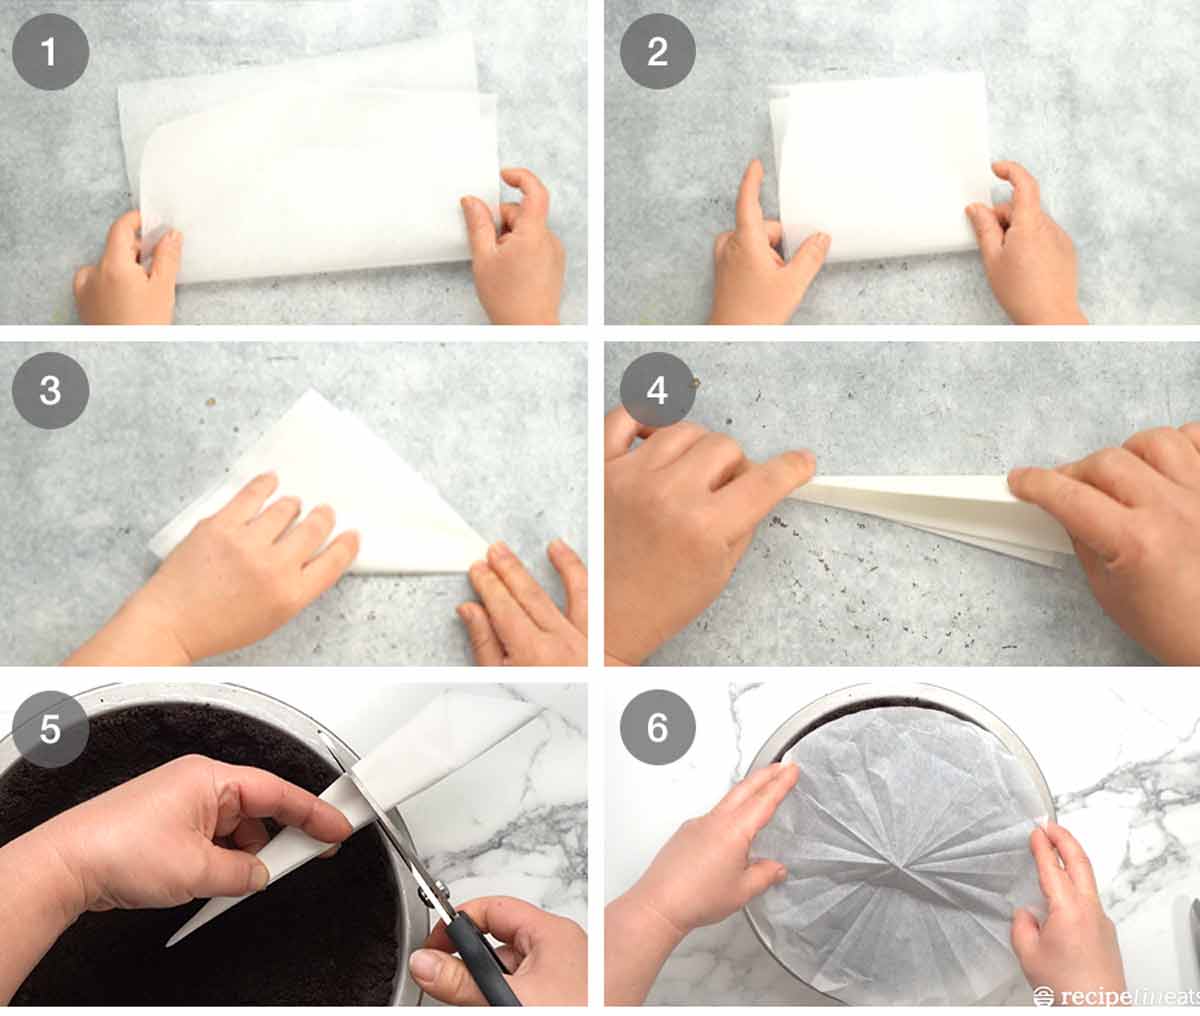 How to cut a circle from paper - cartouche / round cake pan liner